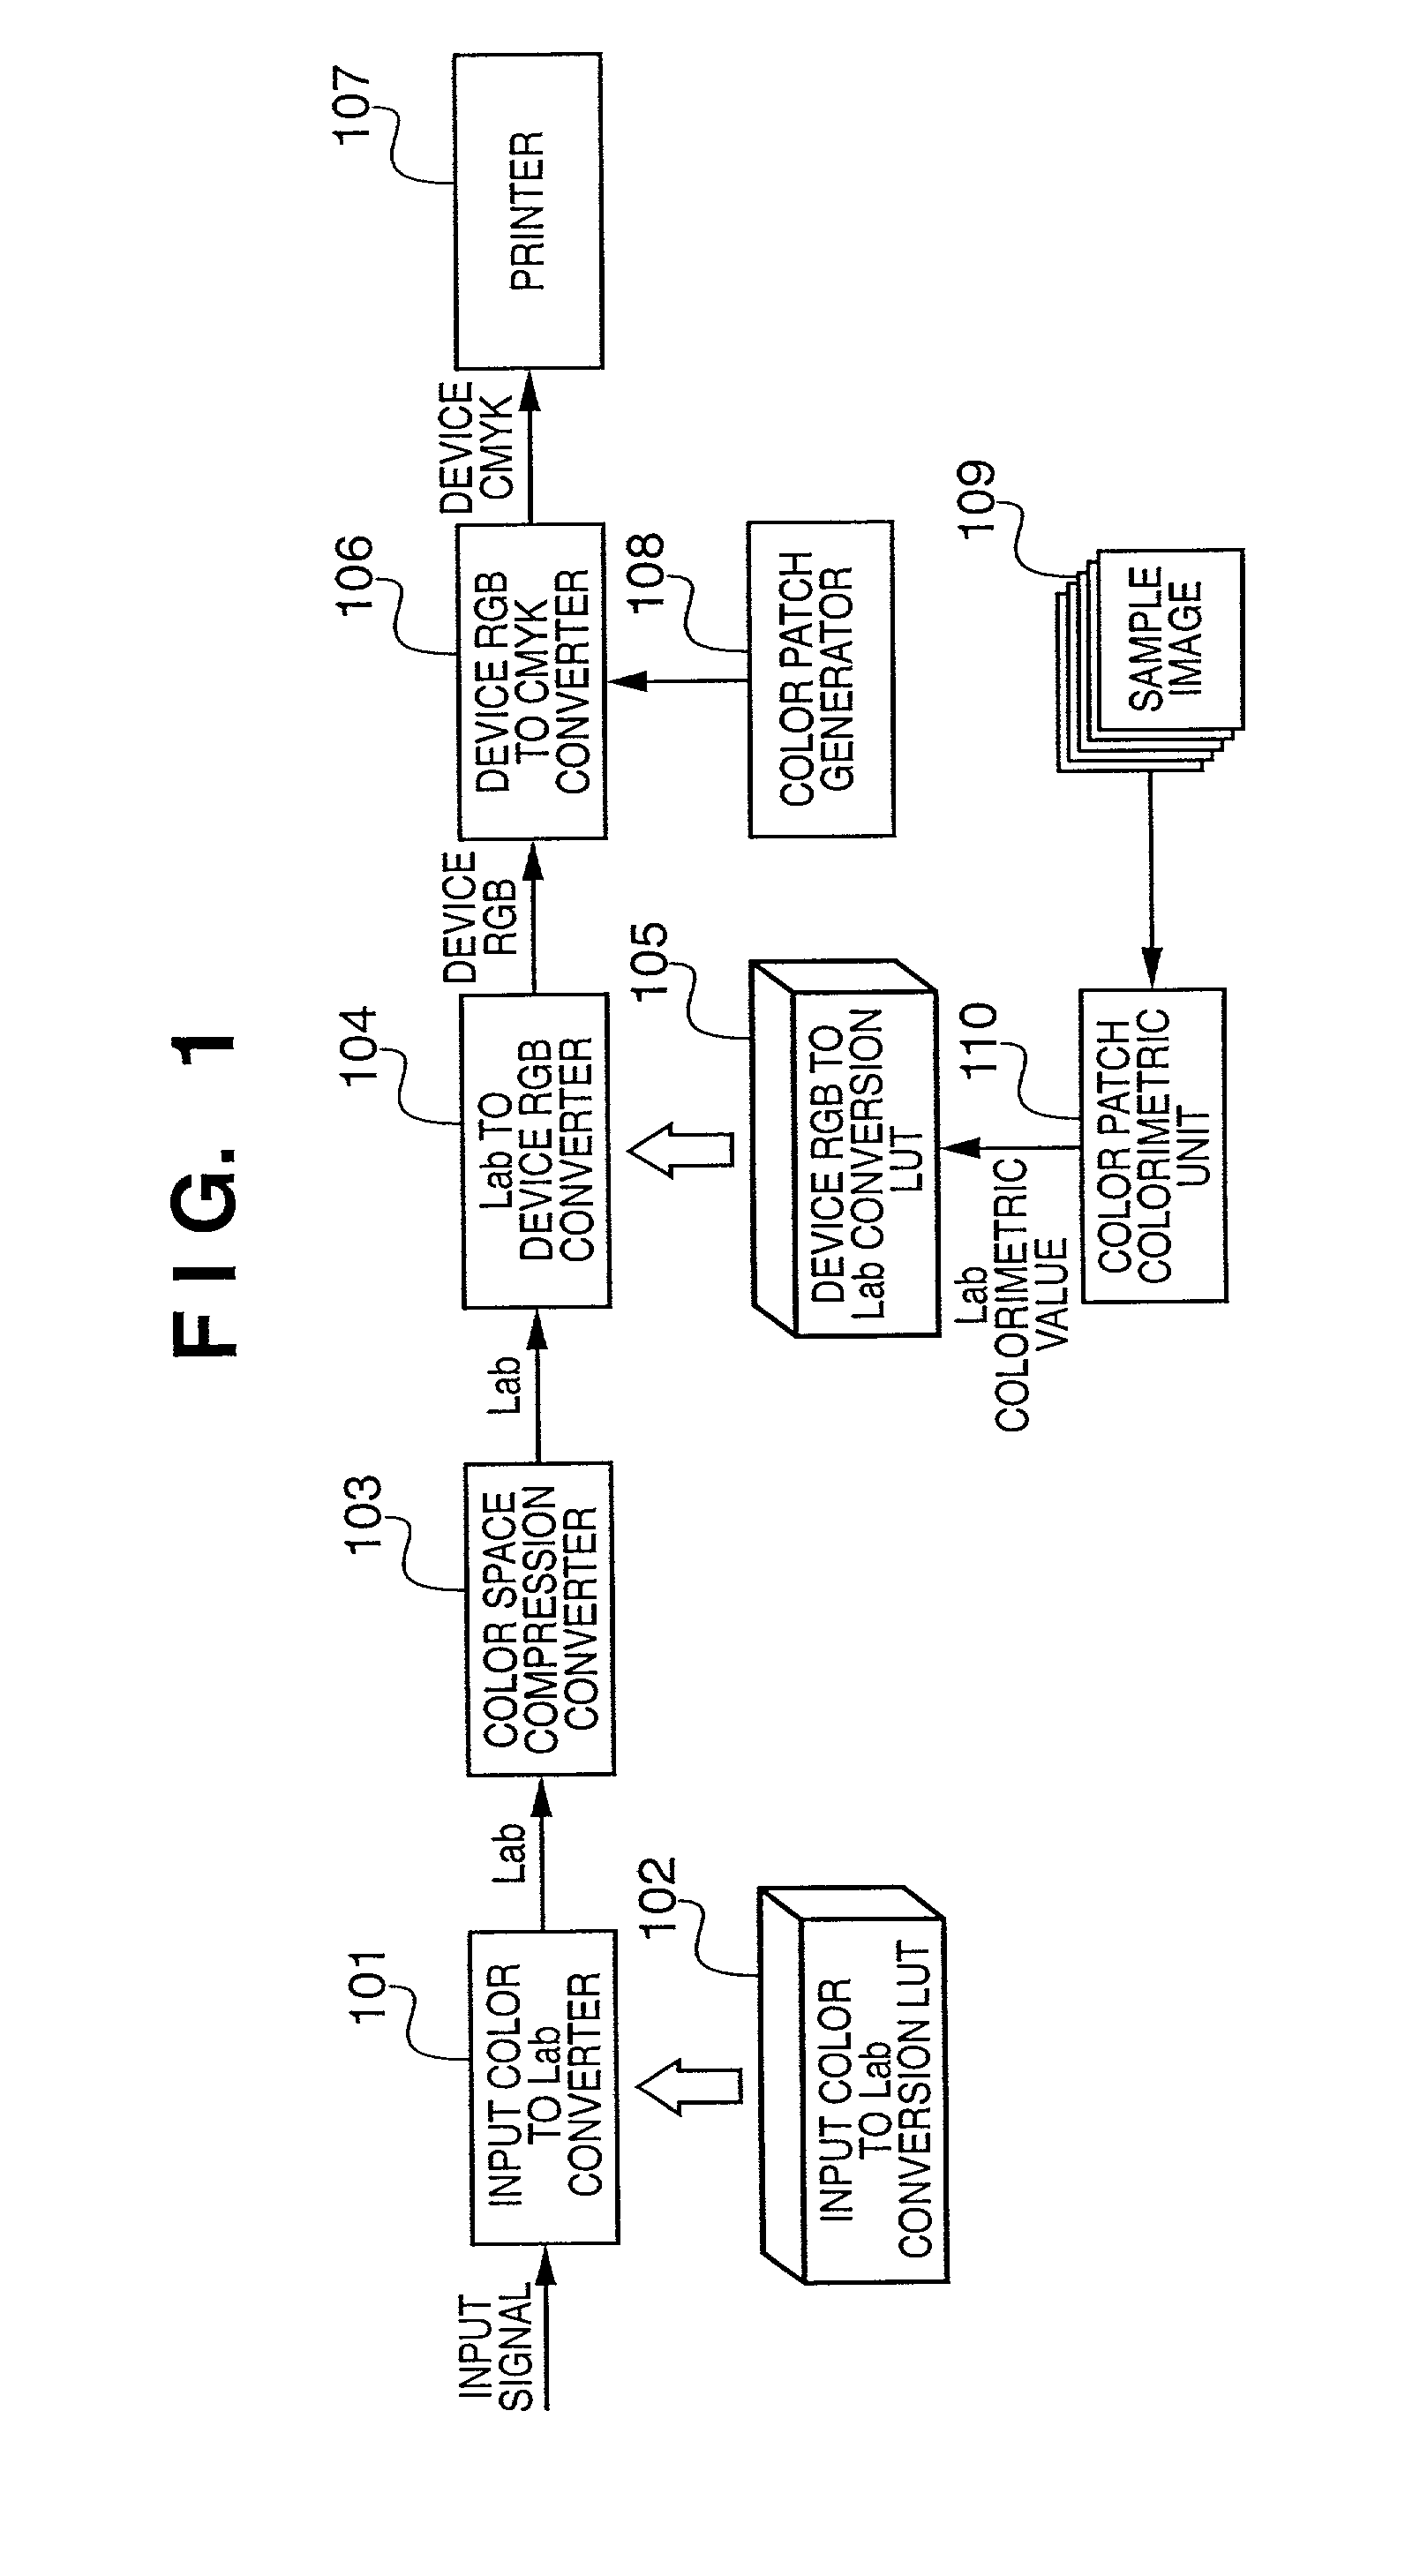 Image processing method and apparatus, and profile management method